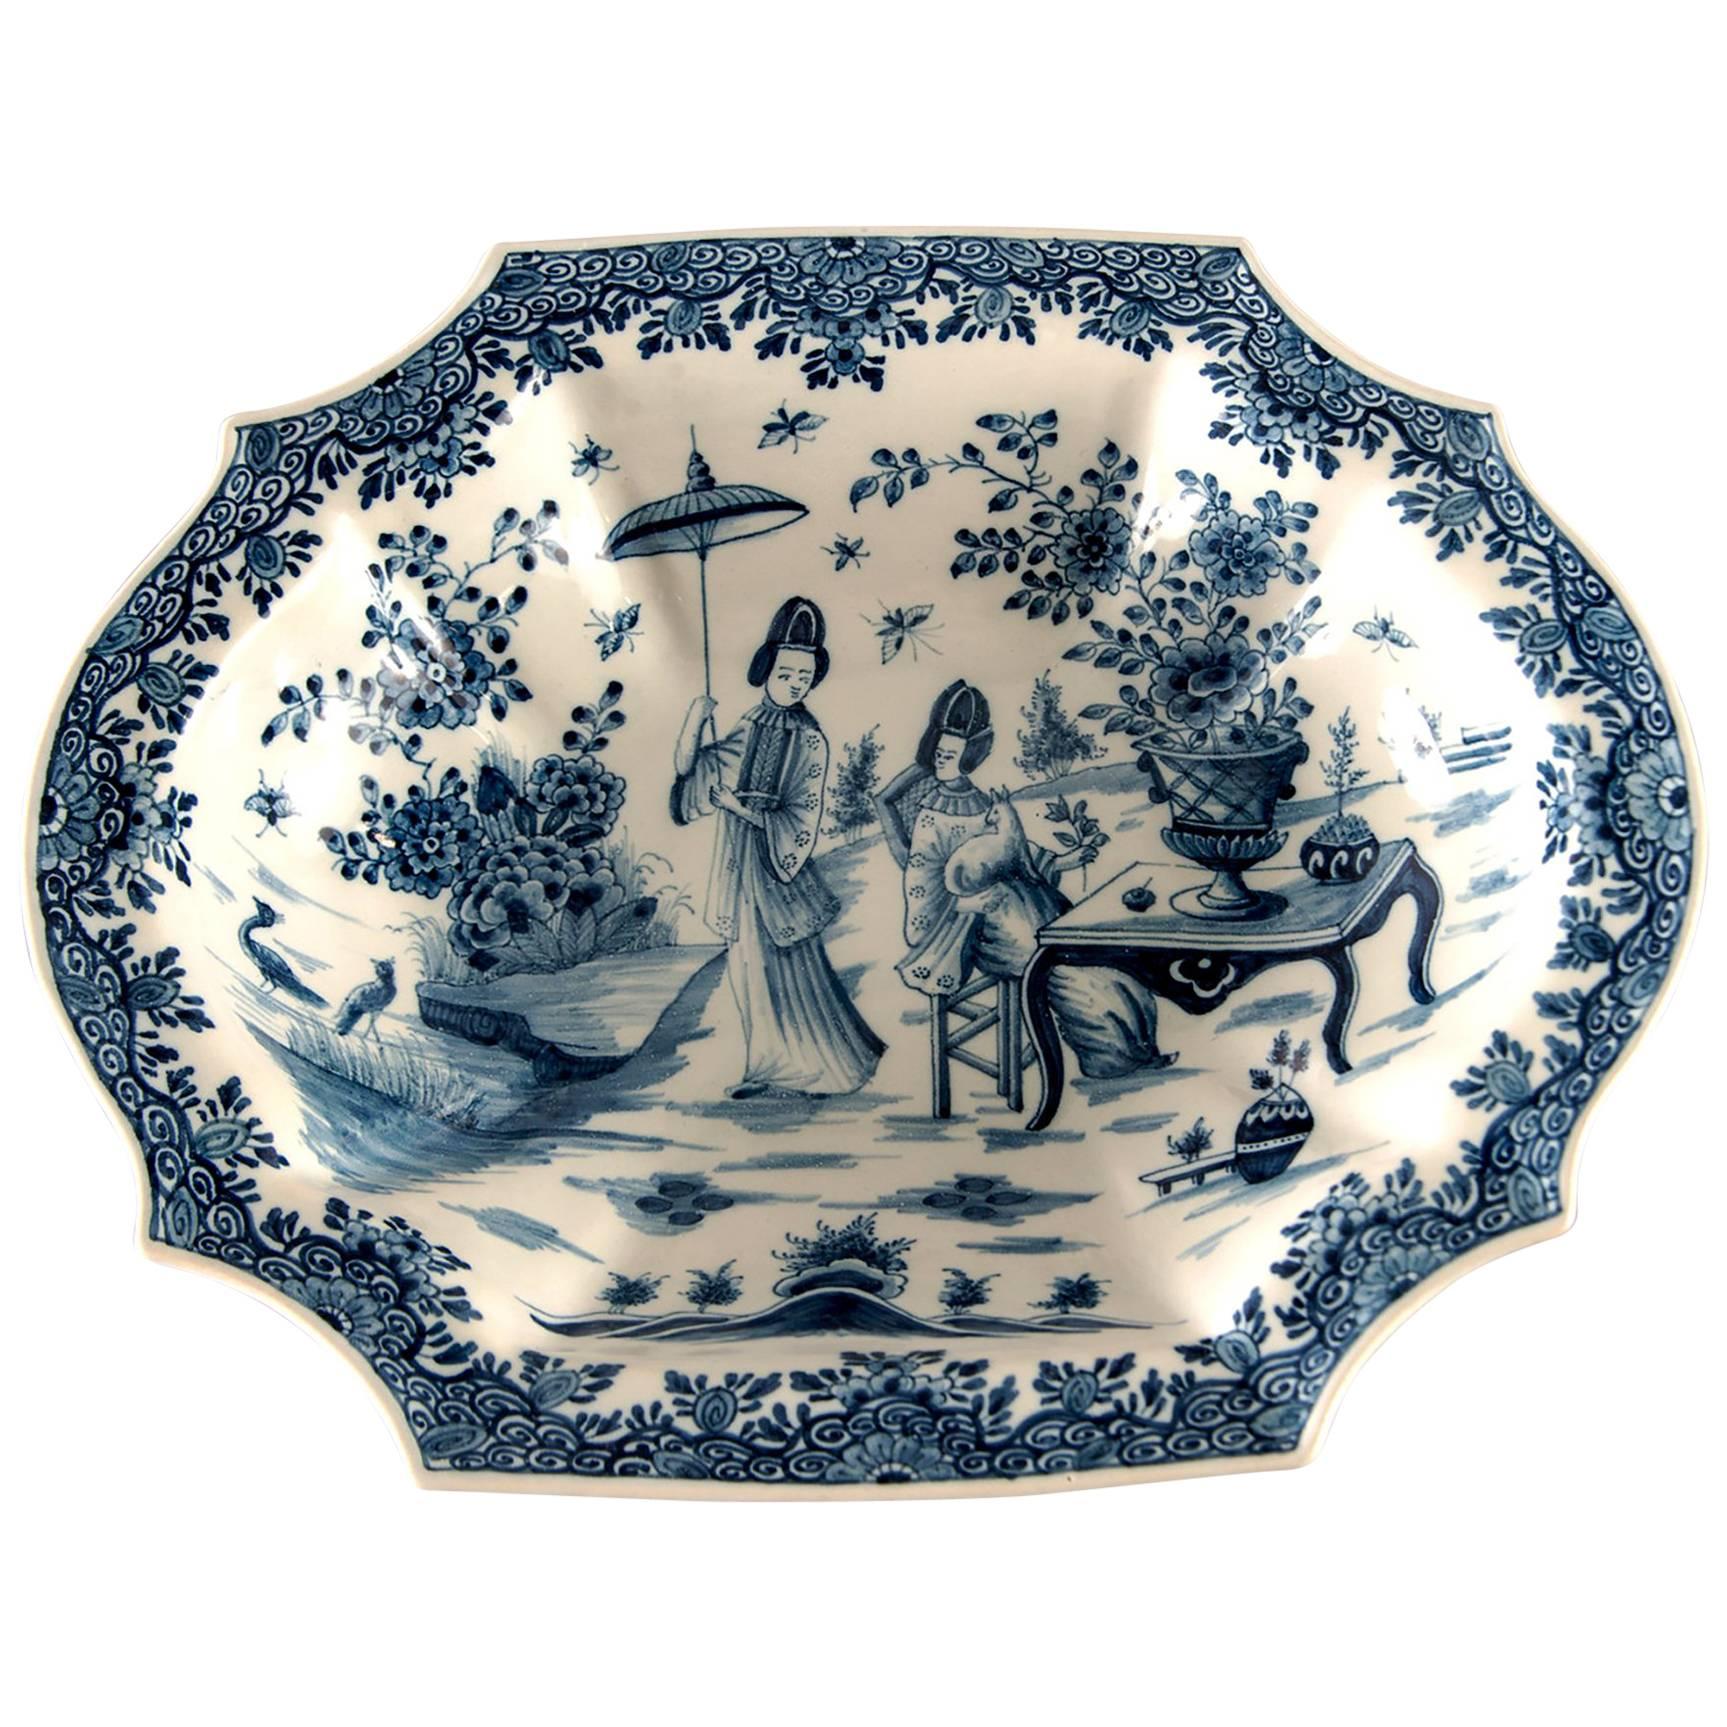 Blue and White Delft Platter with Chinoiserie Design